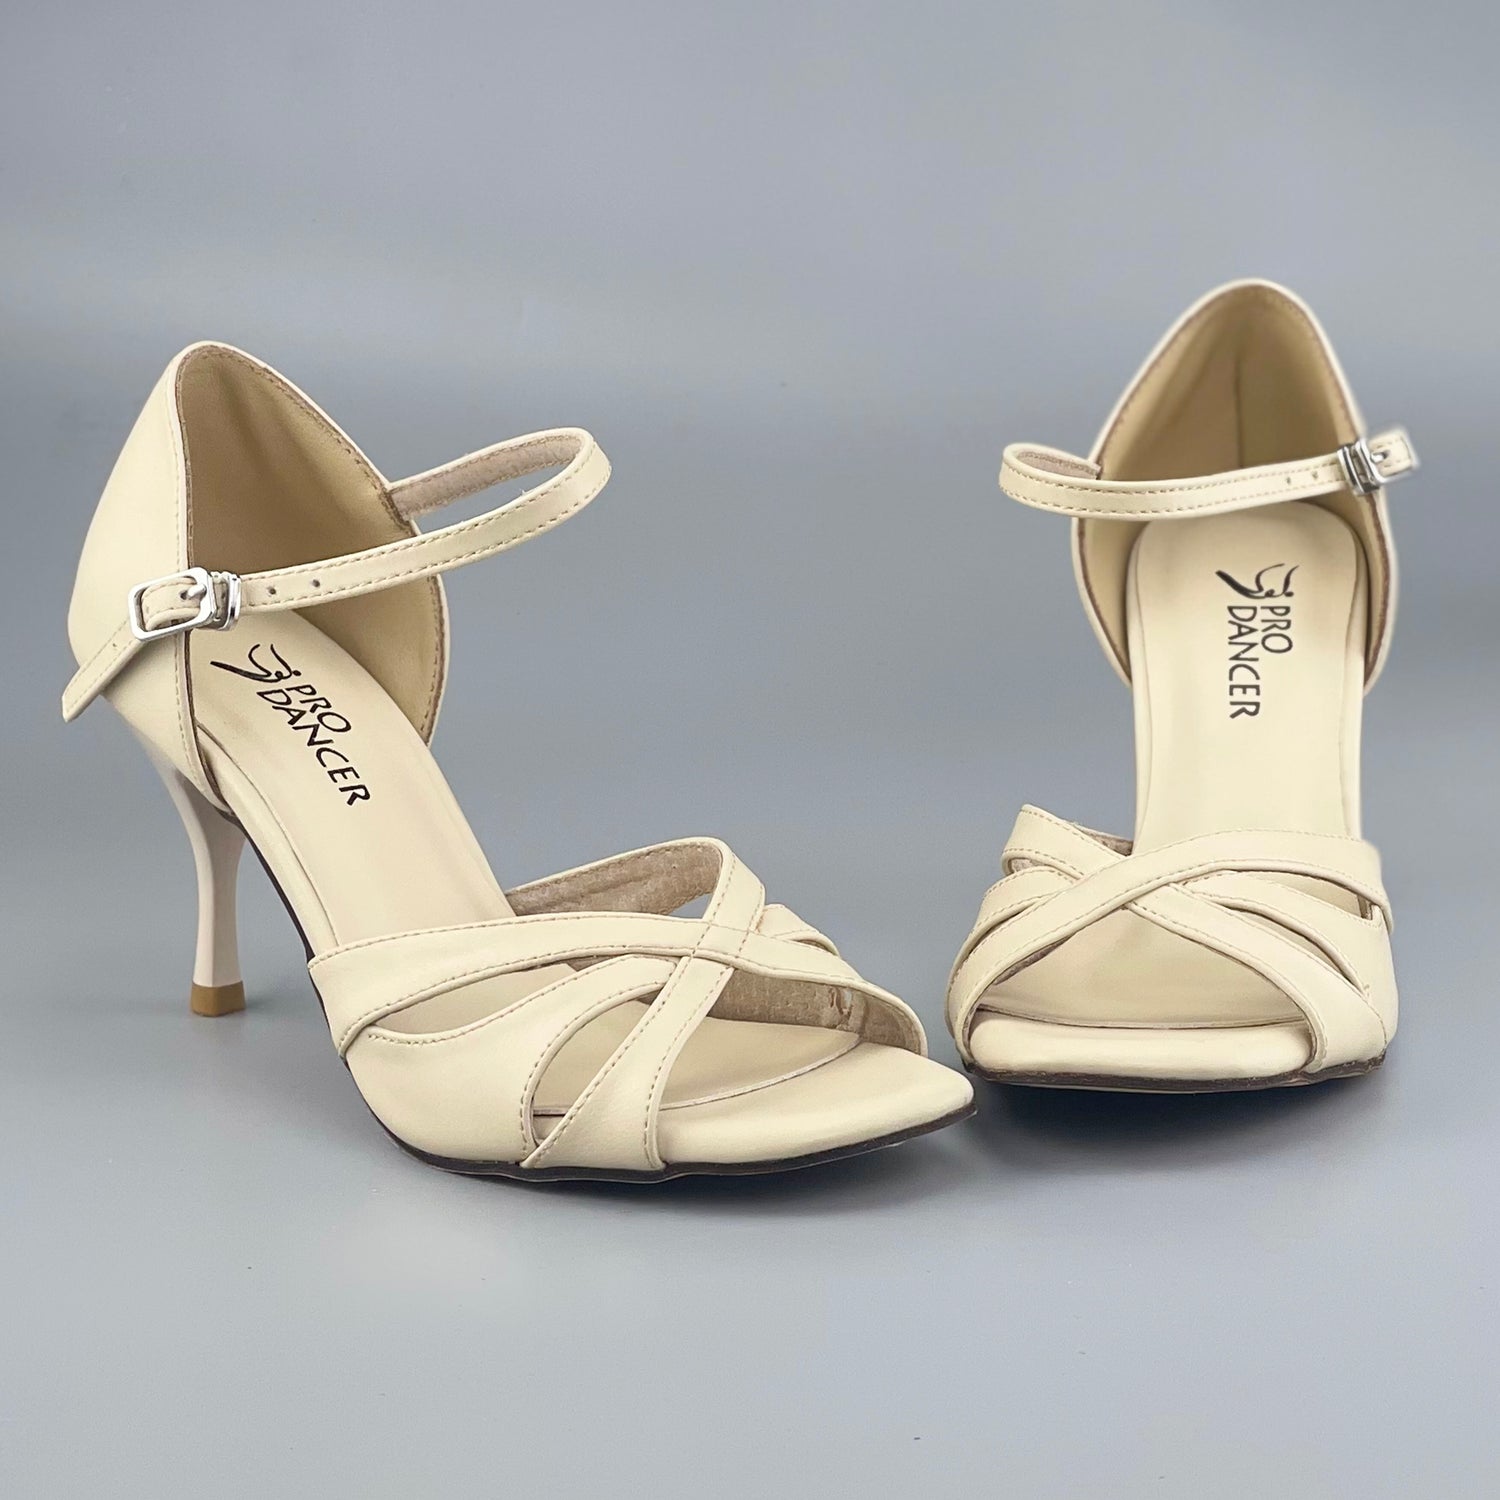 Pro Dancer Tango Argentino Shoes high heel dance sandals with leather sole in beige color (PD-9061A)6